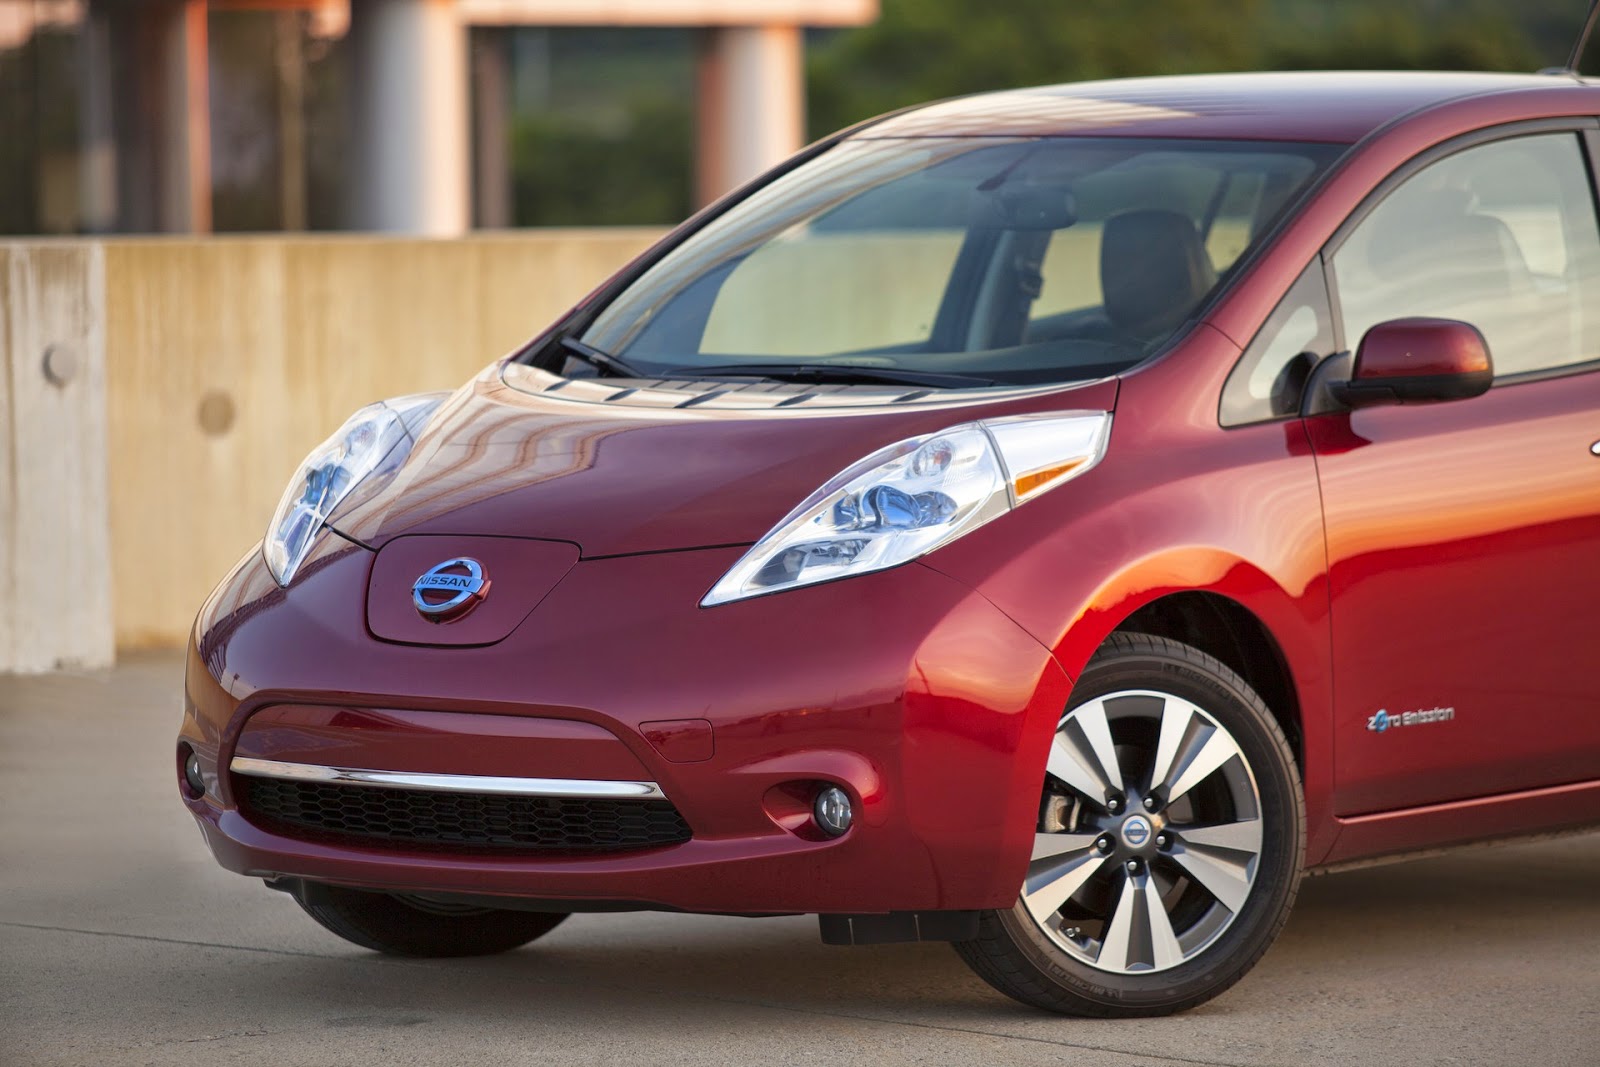 Electric Cars steal the market share in 2014